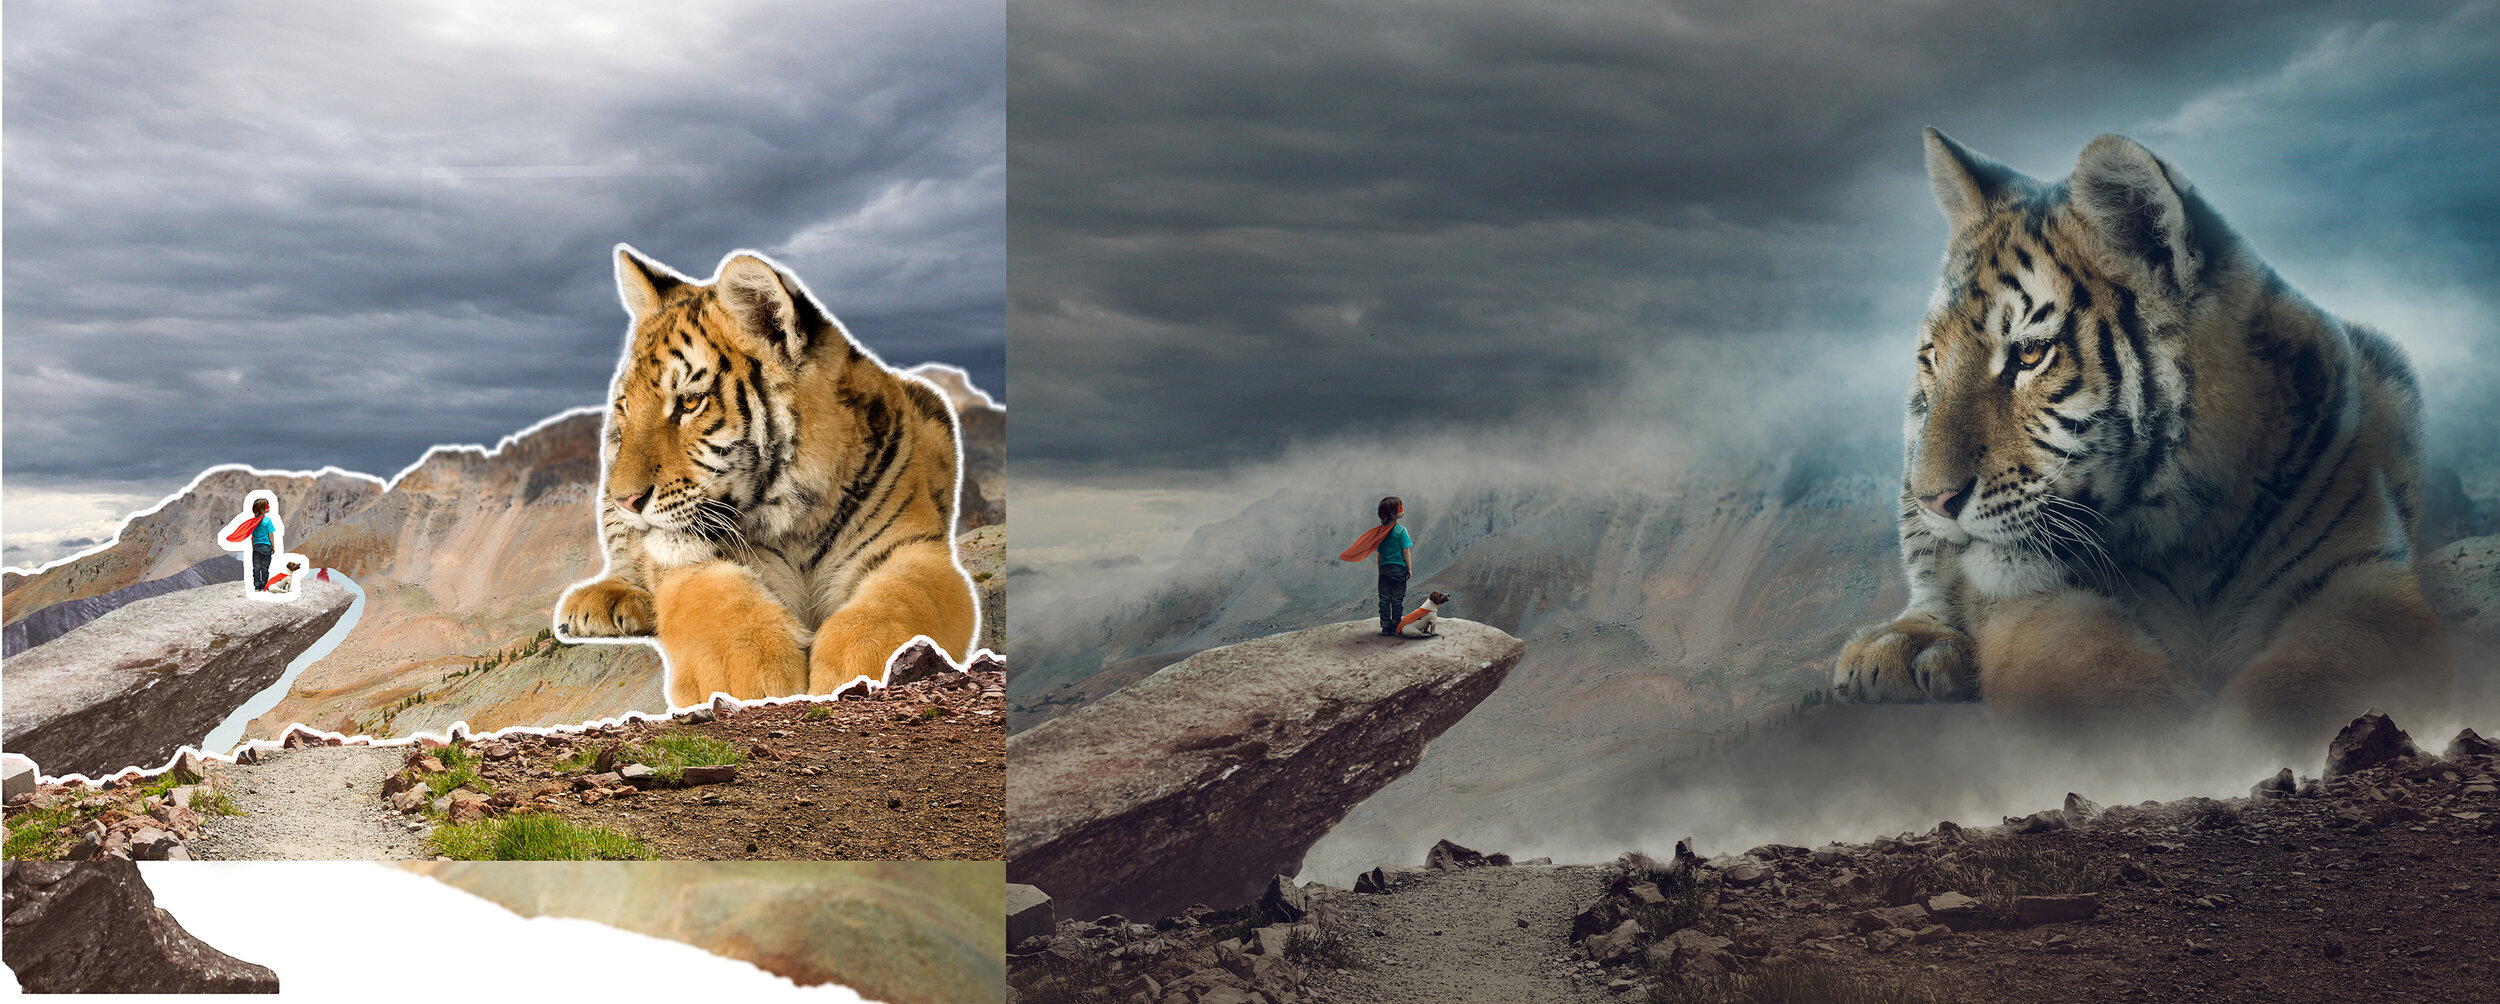 tiger and a boy 2048before after.jpg